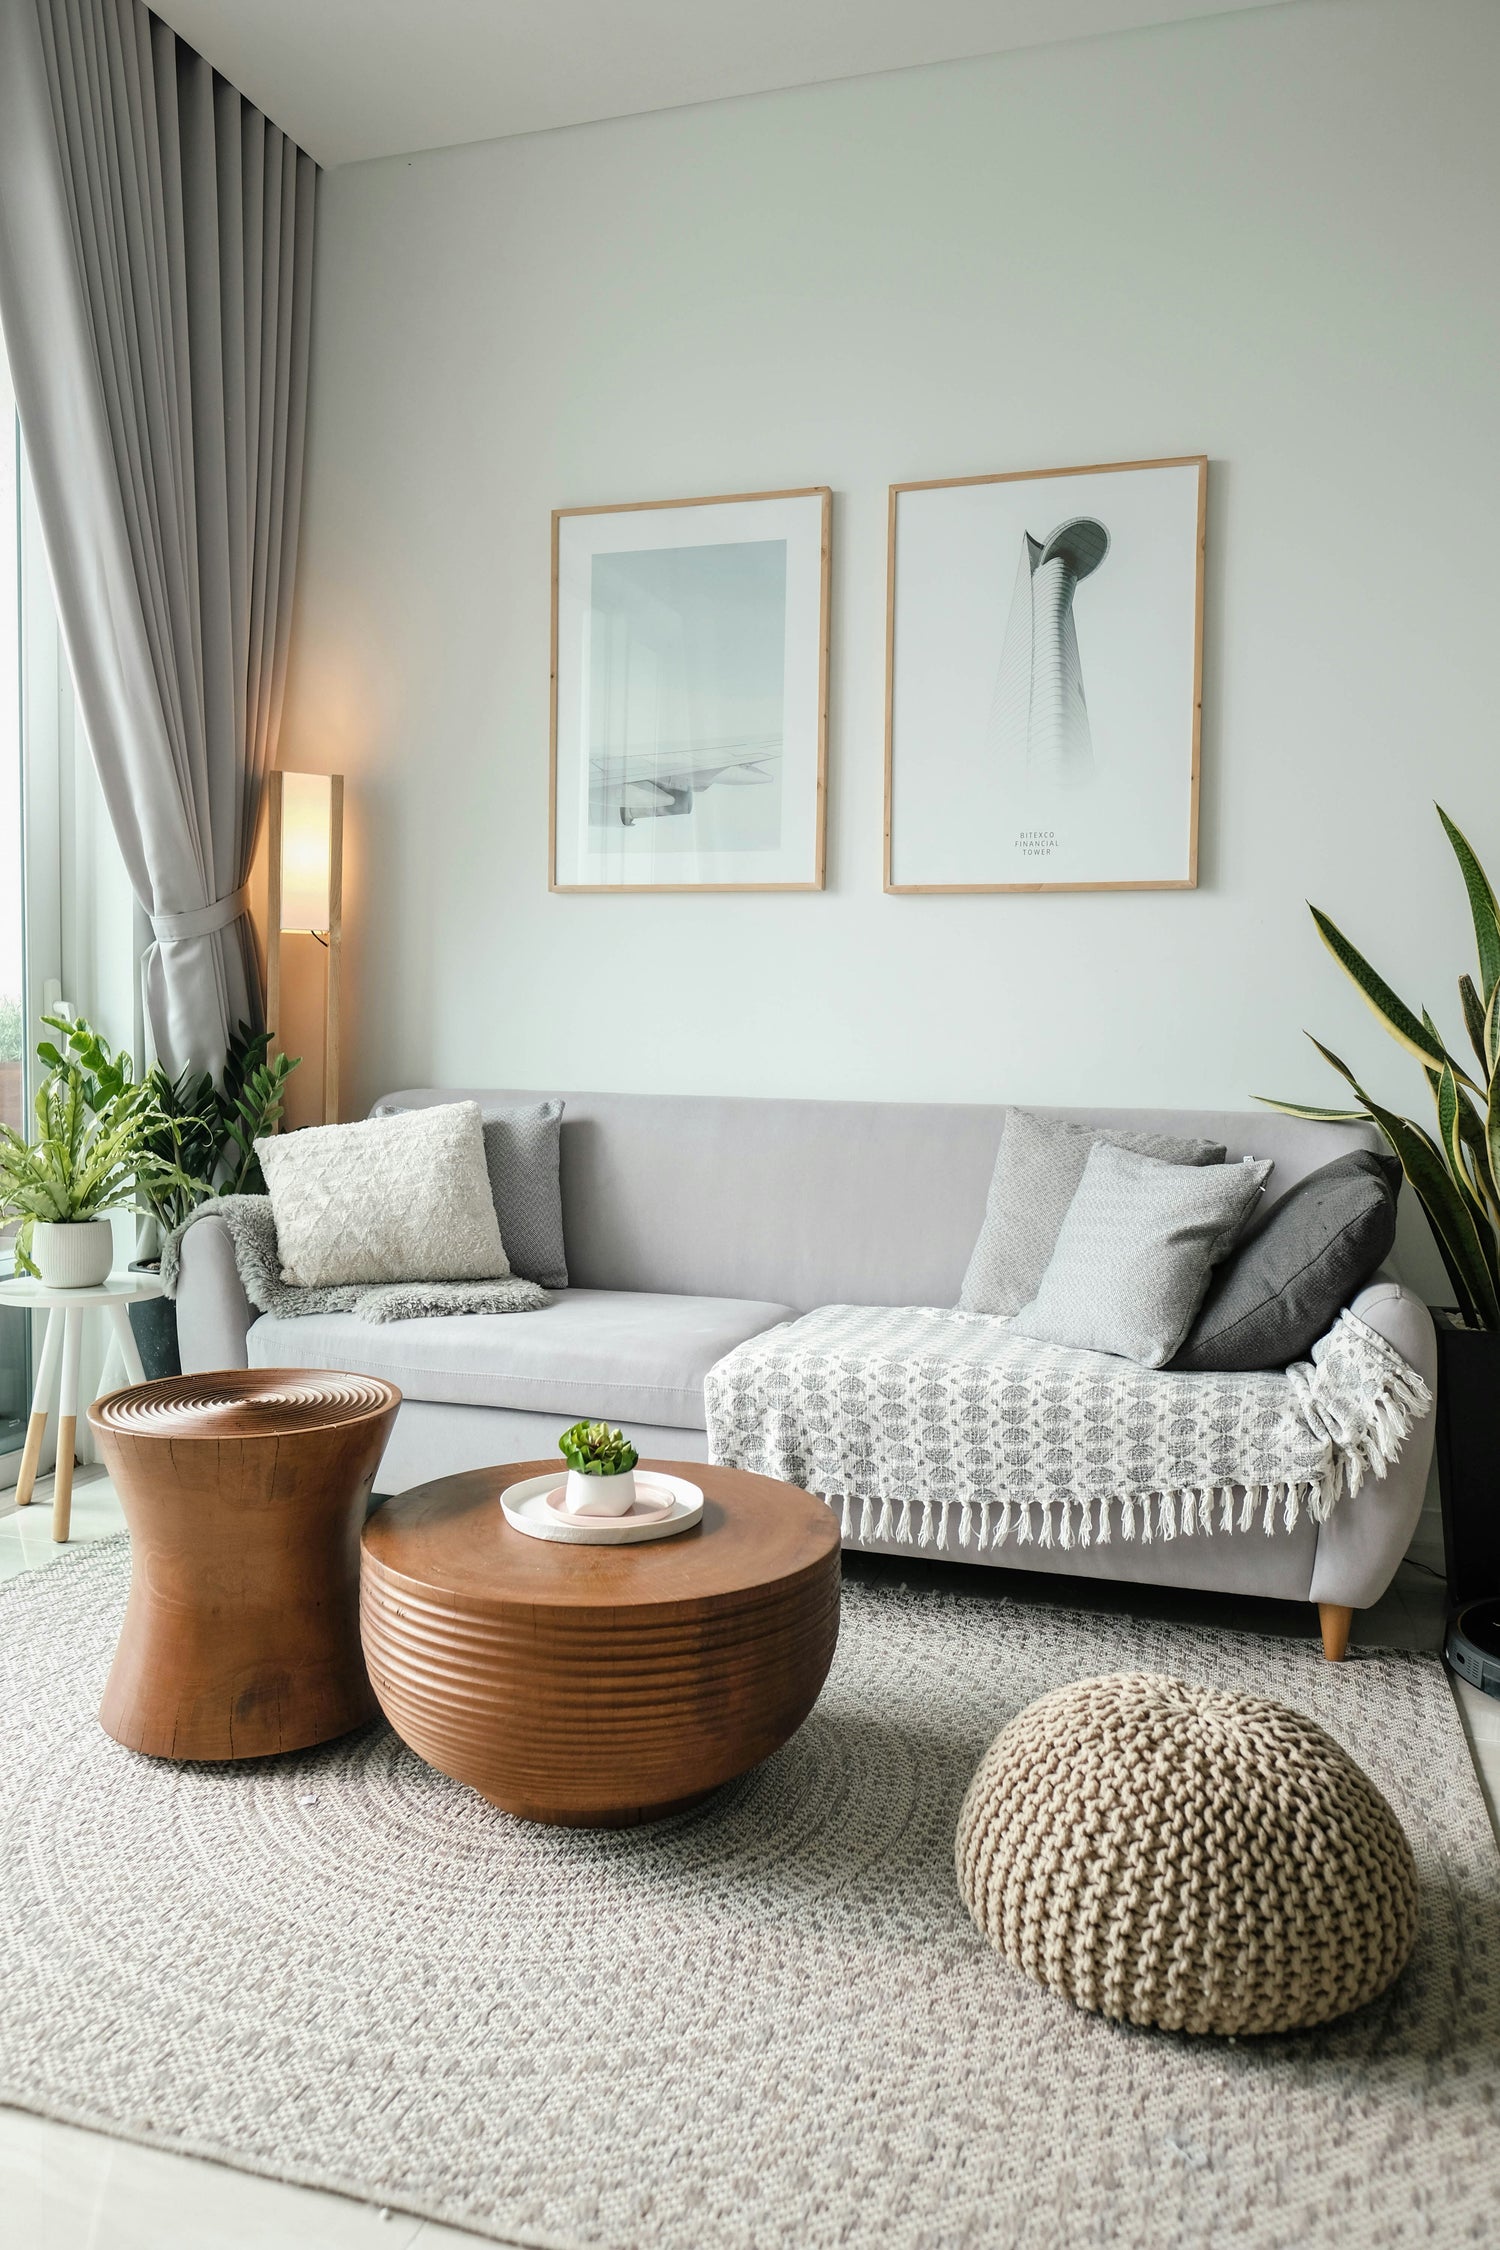 Discover our living room interior design collection, featuring stylish decor to elevate your space. From accent chairs to coffee tables, create a welcoming atmosphere with our curated selection.